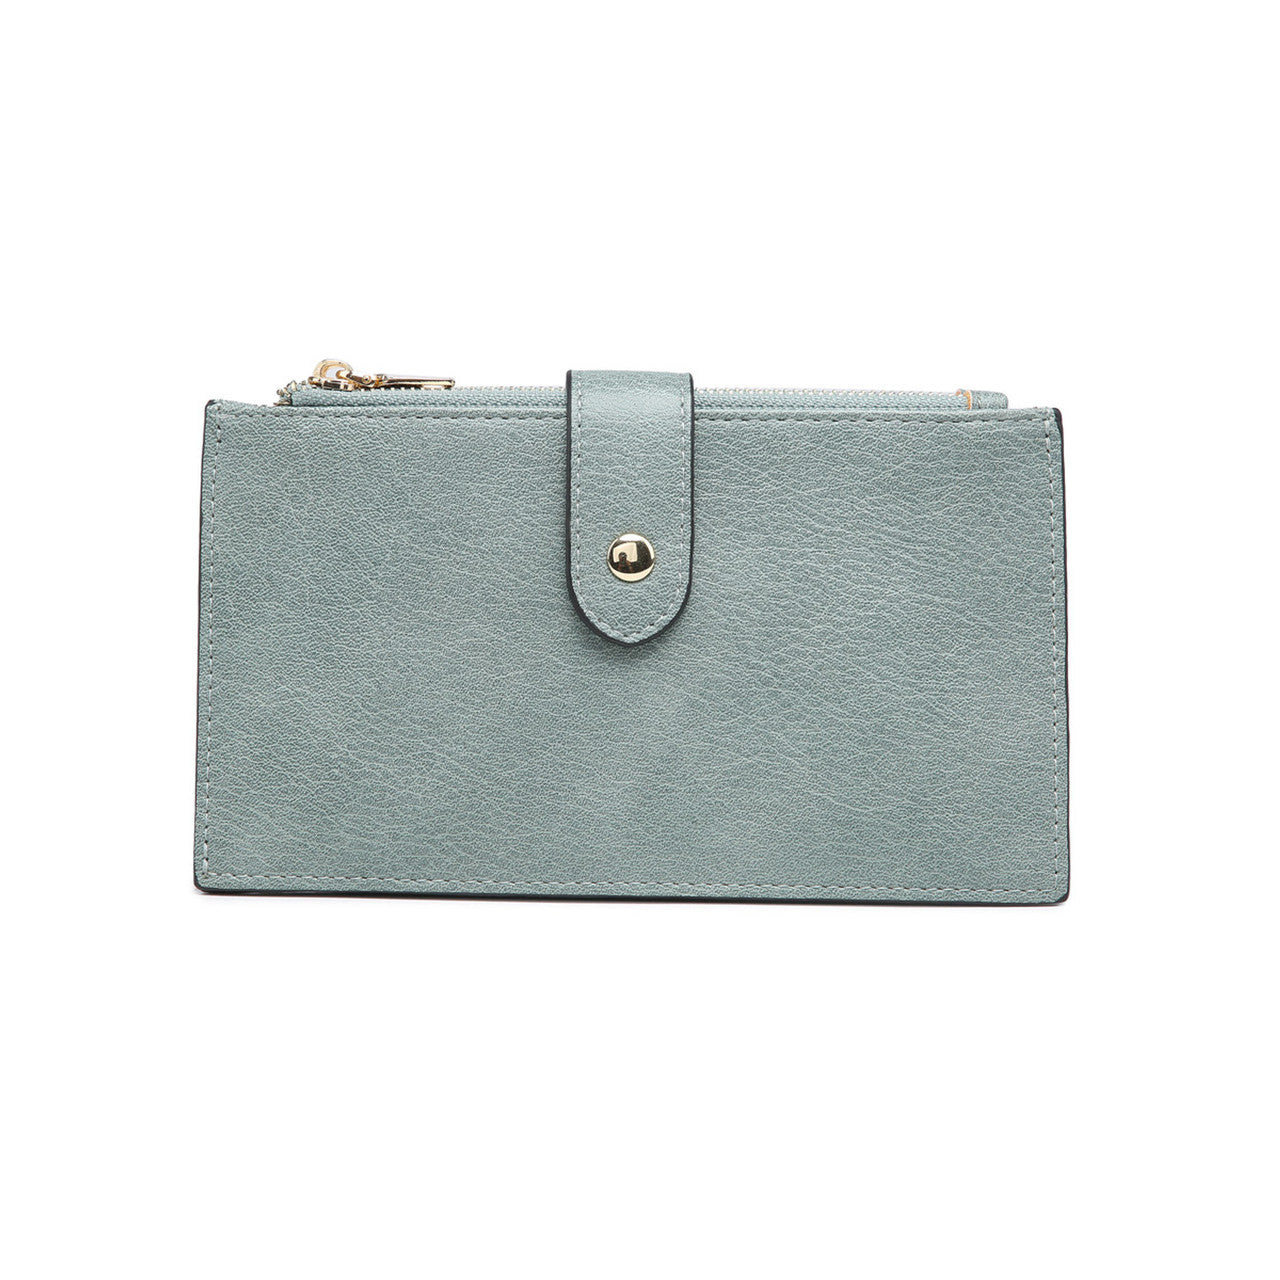 Jen & Co. Odelia RFID Two Compartment Wallet